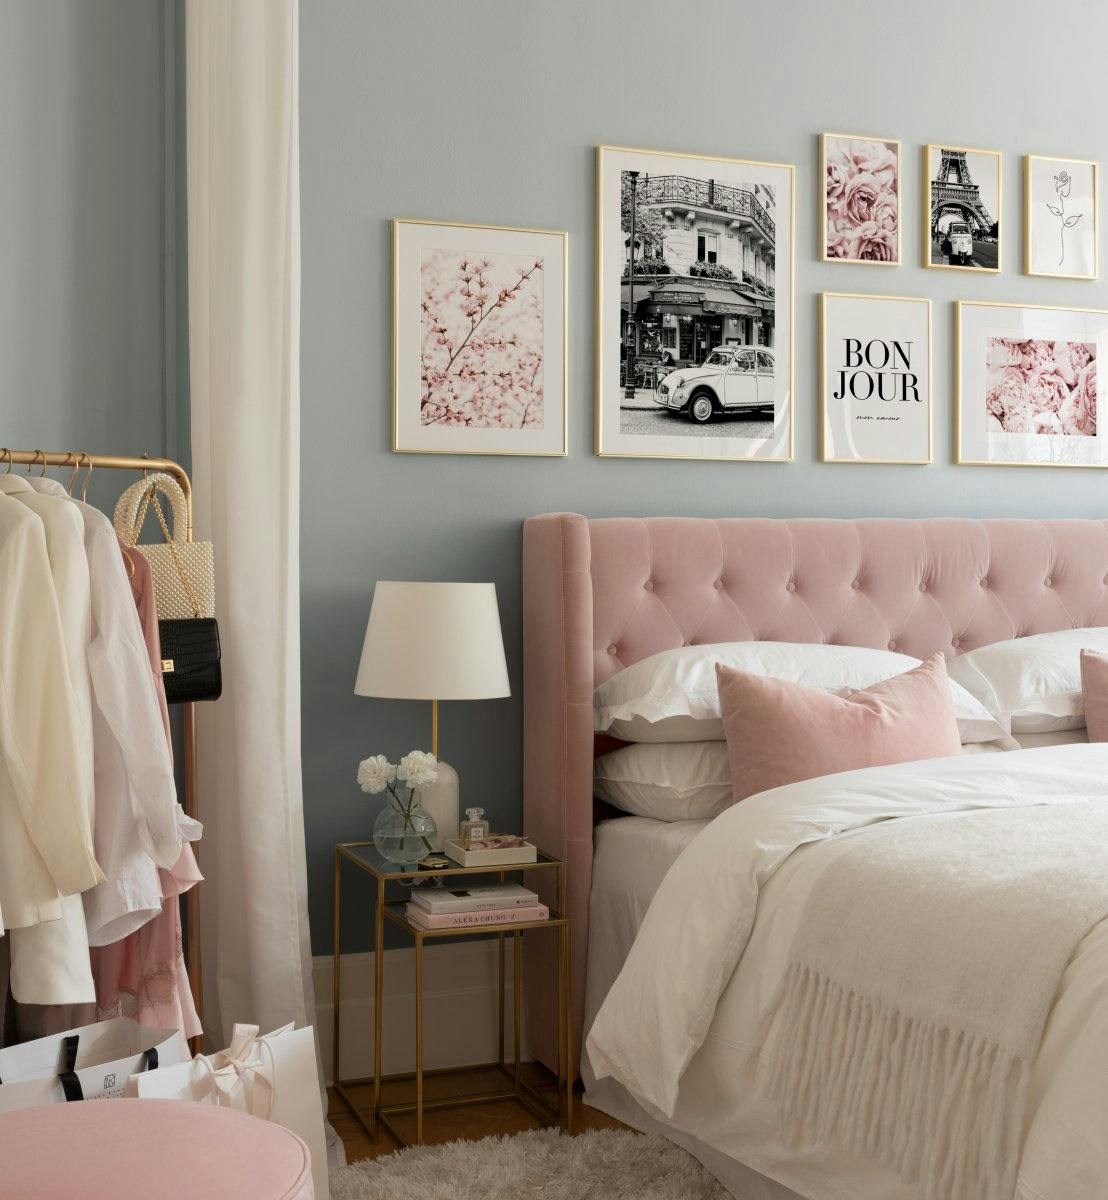 Monochrome and pink prints for the bedroom